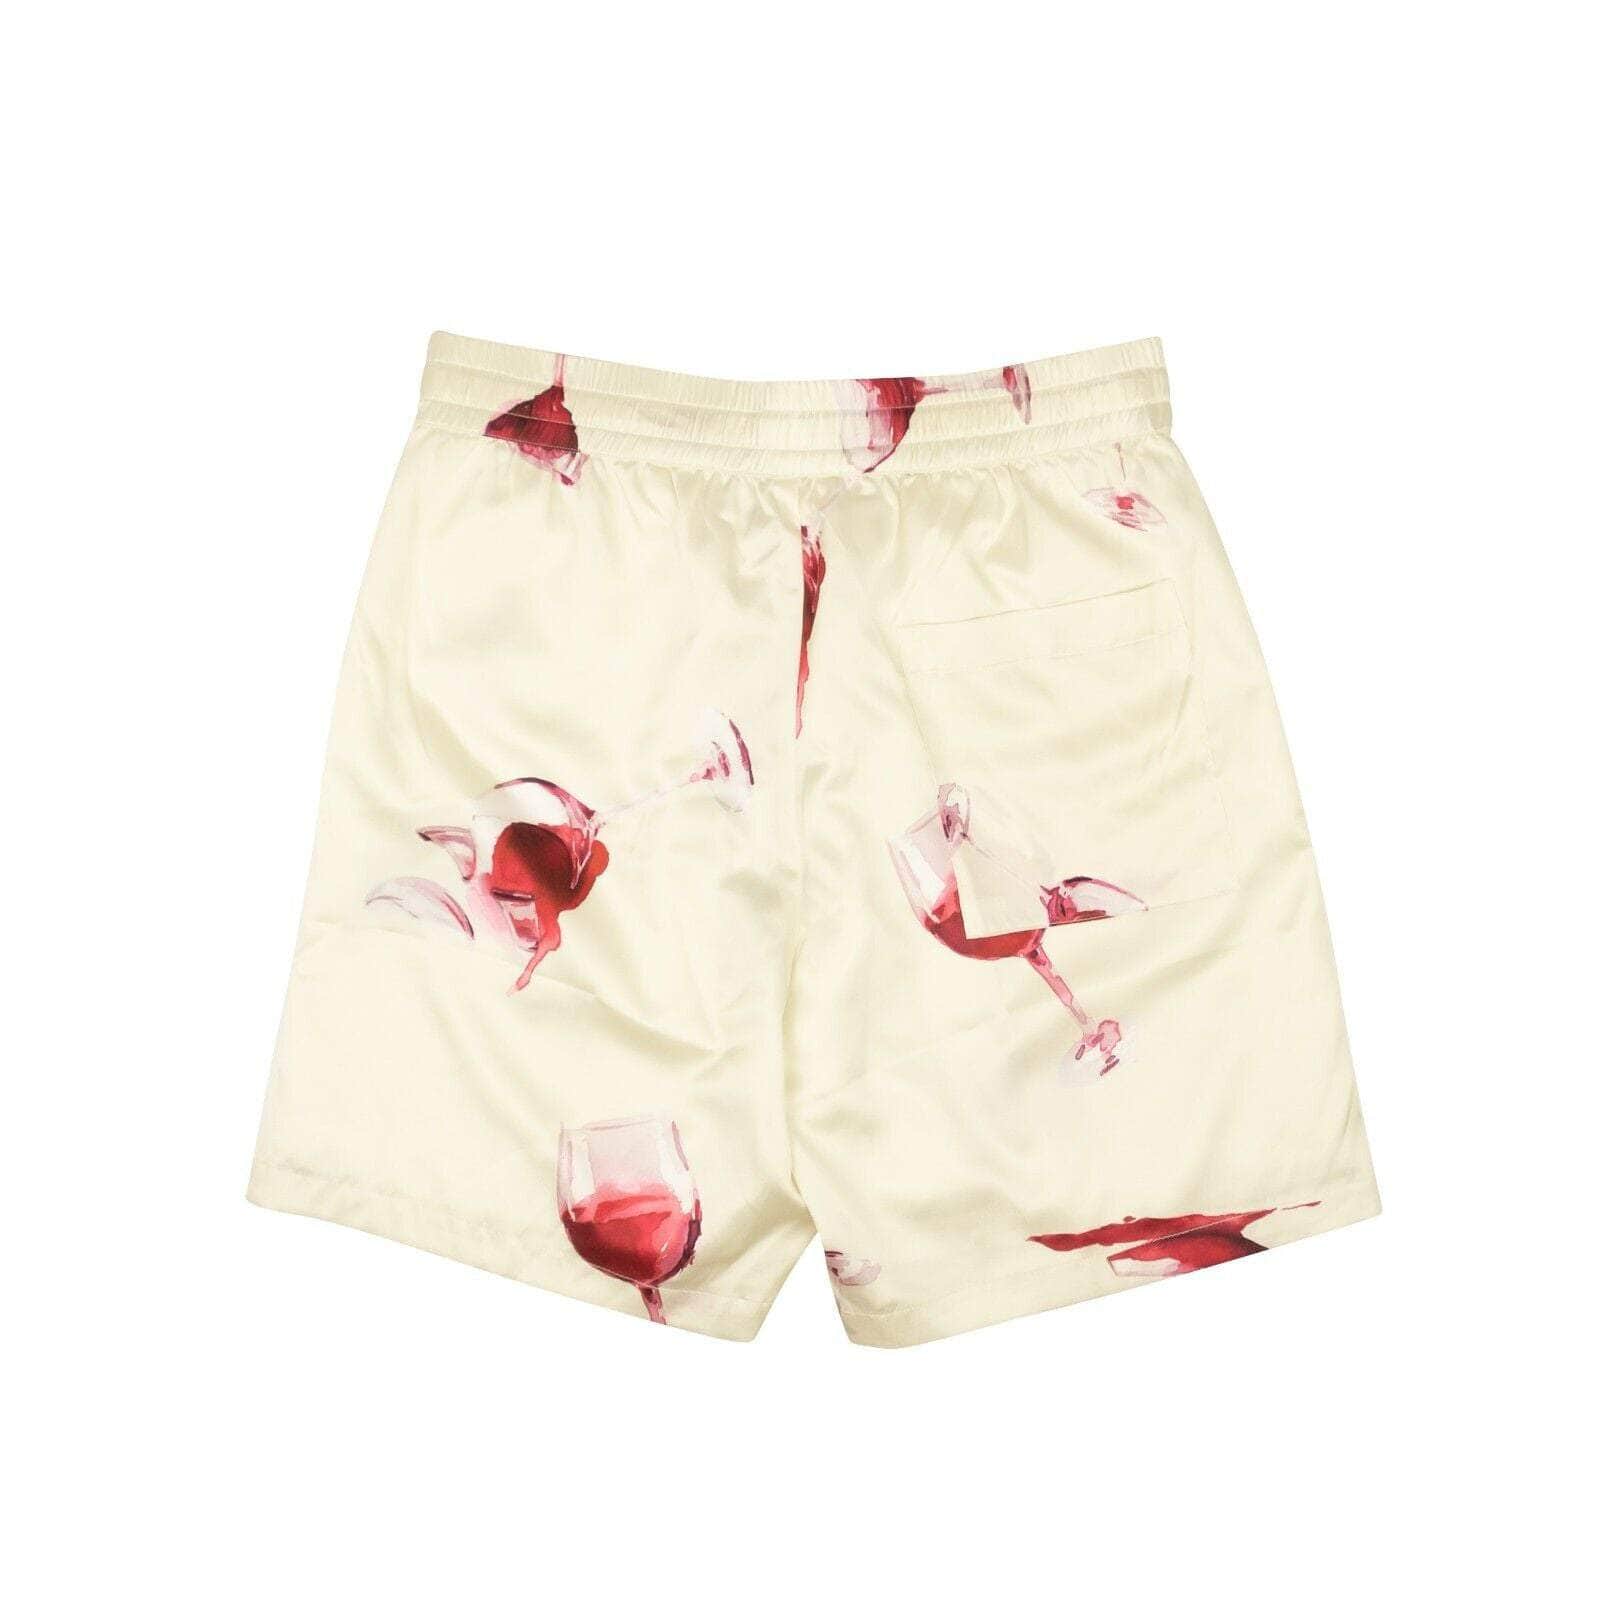 Nahmias 250-500, channelenable-all, chicmi, couponcollection, gender-mens, main-clothing, mens-shoes, nahmias, size-l Cream Wine Glass Spill Design Silk Shorts